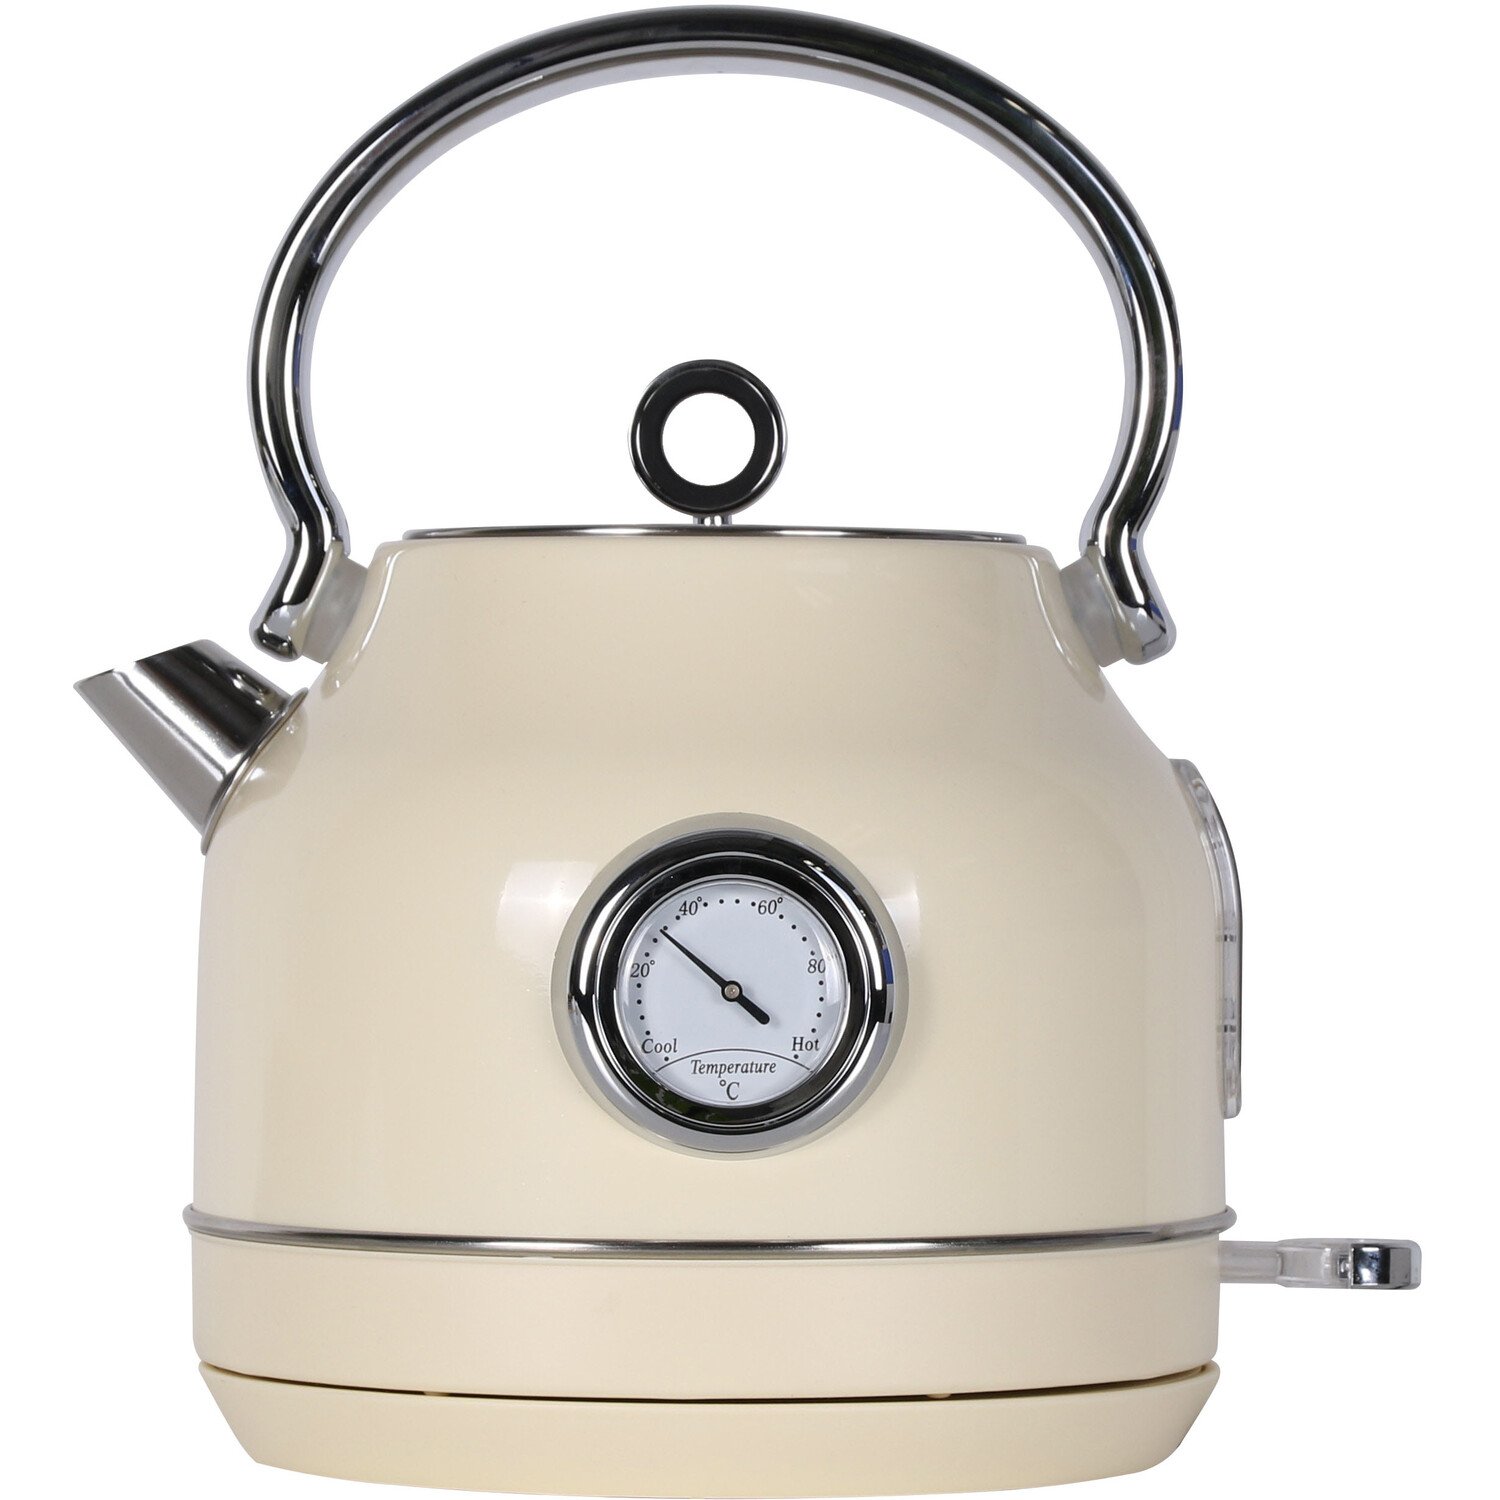 Cream Retro Kettle with Dial 1.7L Image 1